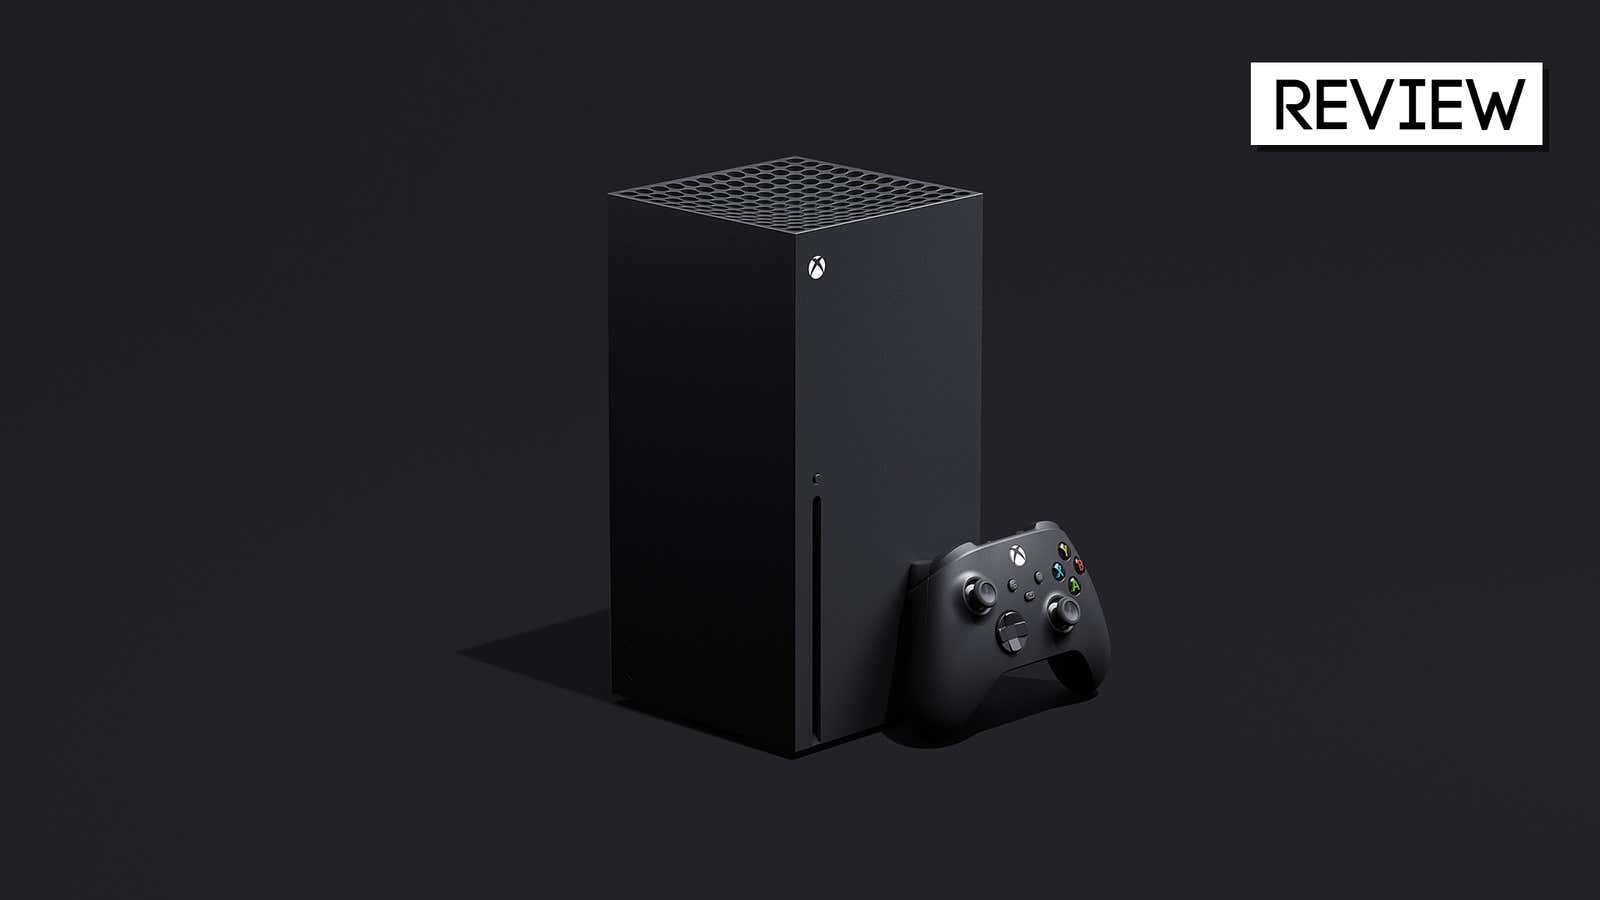 Microsoft Xbox One X review: The ultimate 4K gaming console, but